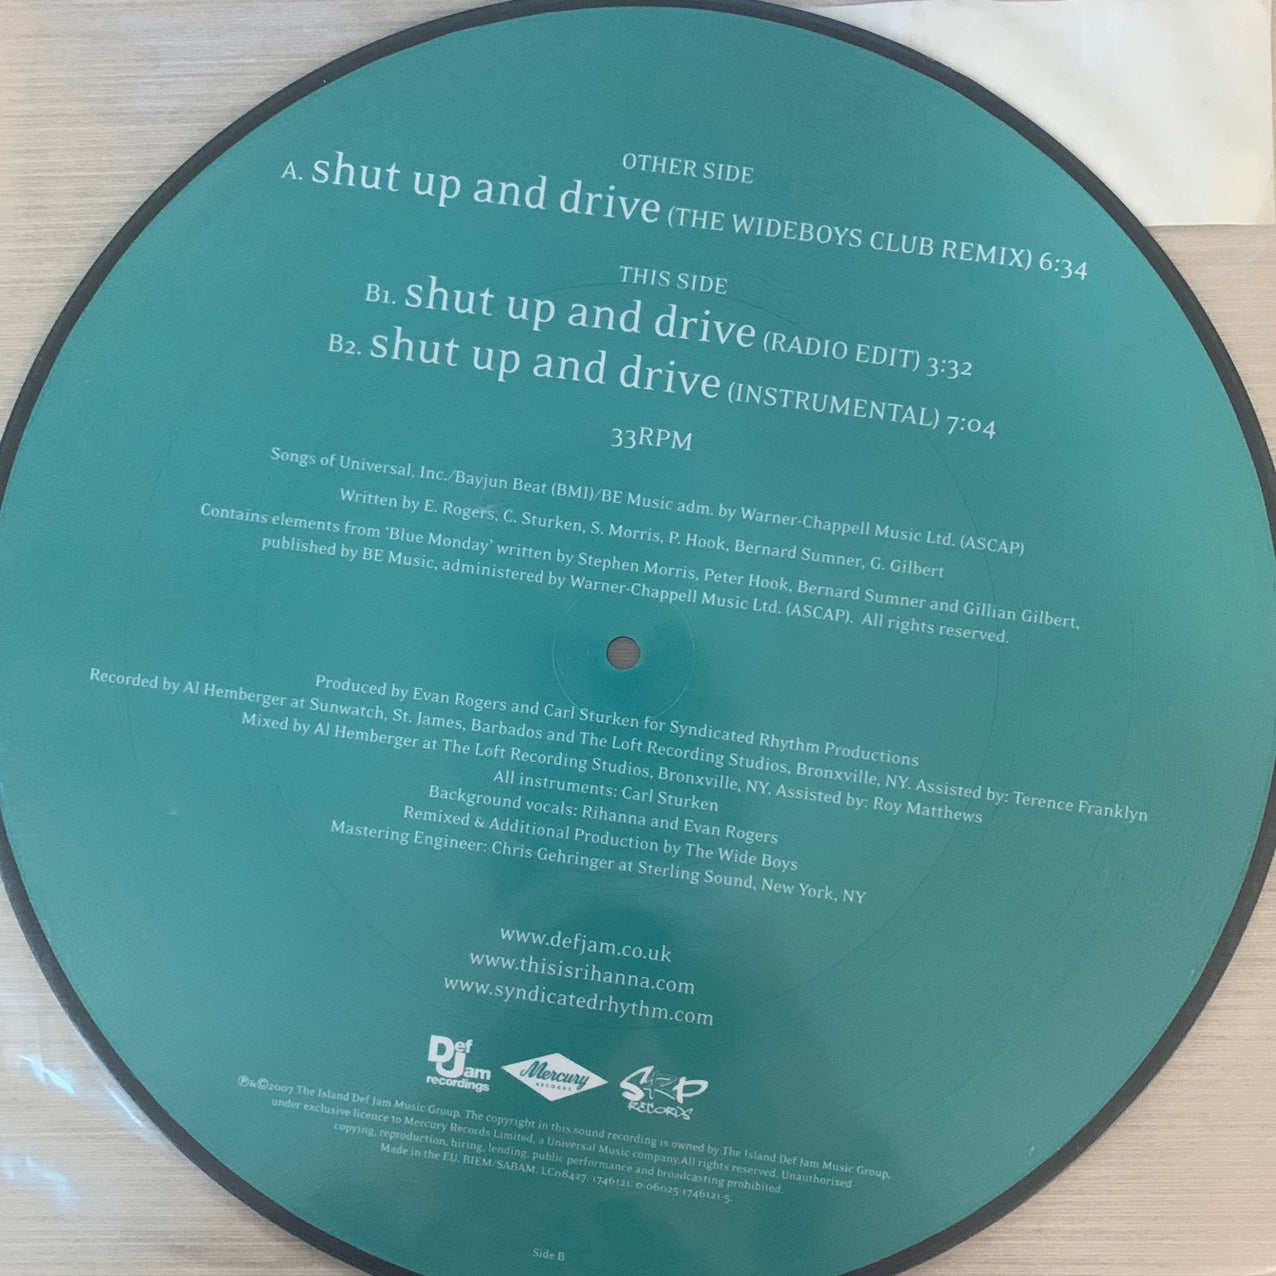 Rihanna “Shut Up And Drive” 3 Track Limited Edition Picture Disc 12inch Vinyl